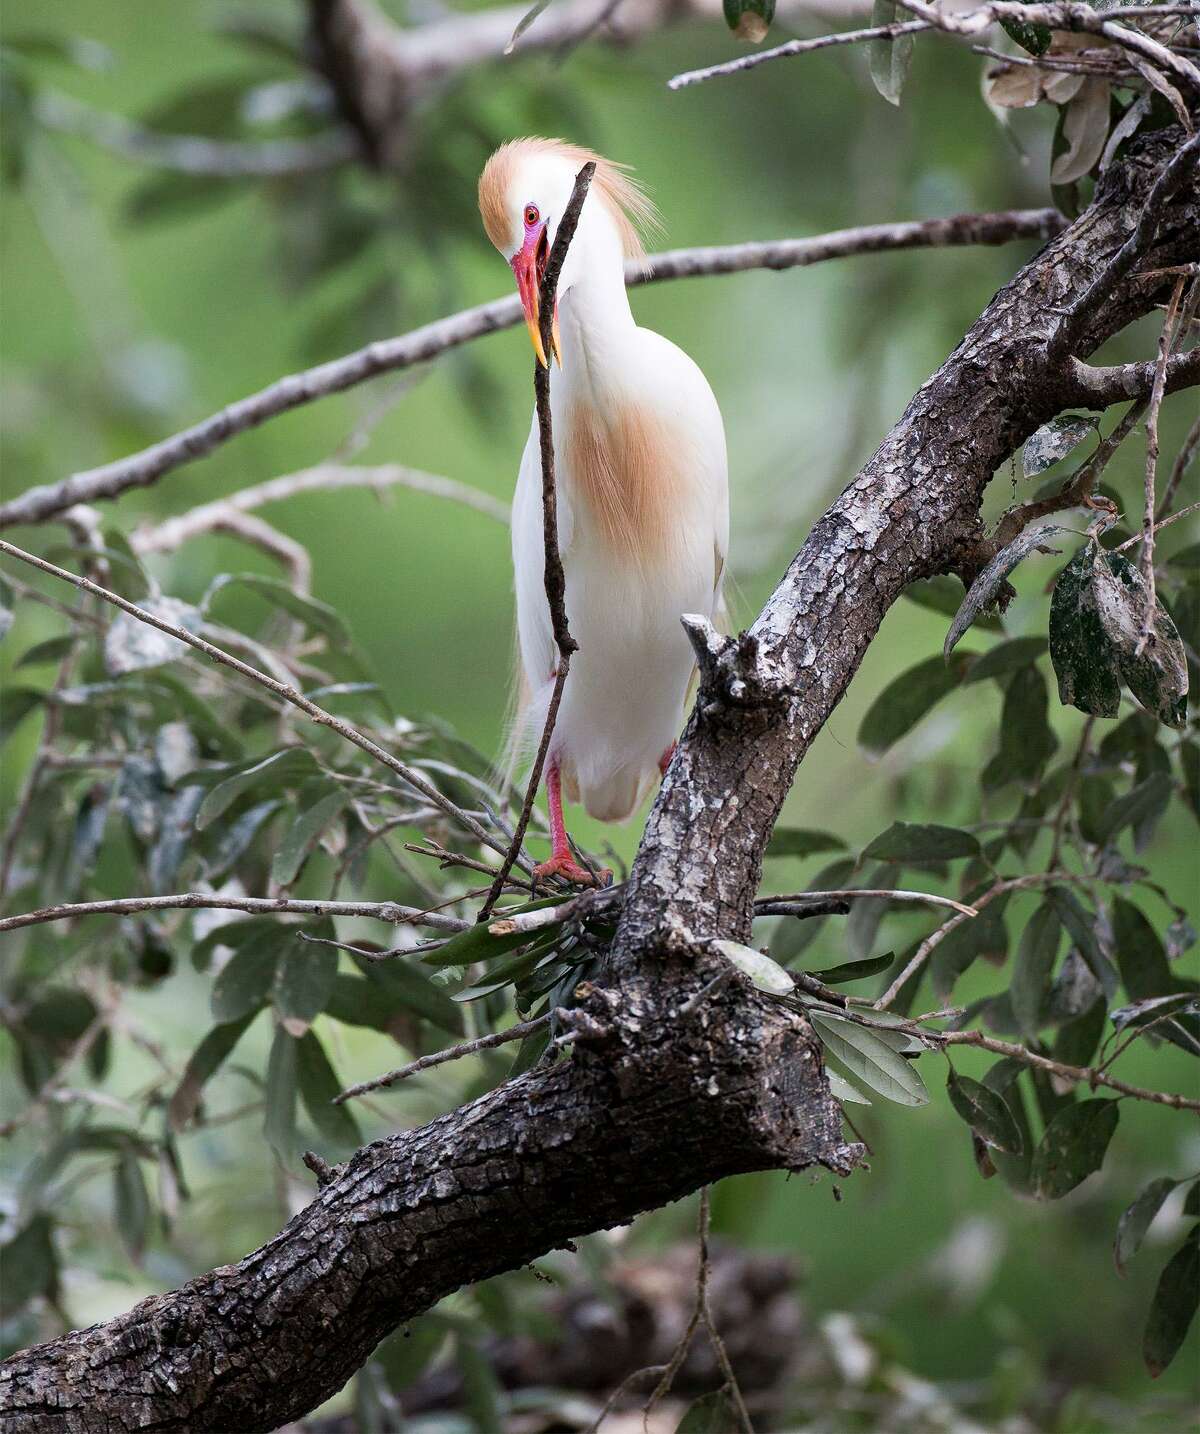 A cattle egret adds a branch to its nest in Brackenridge Park.